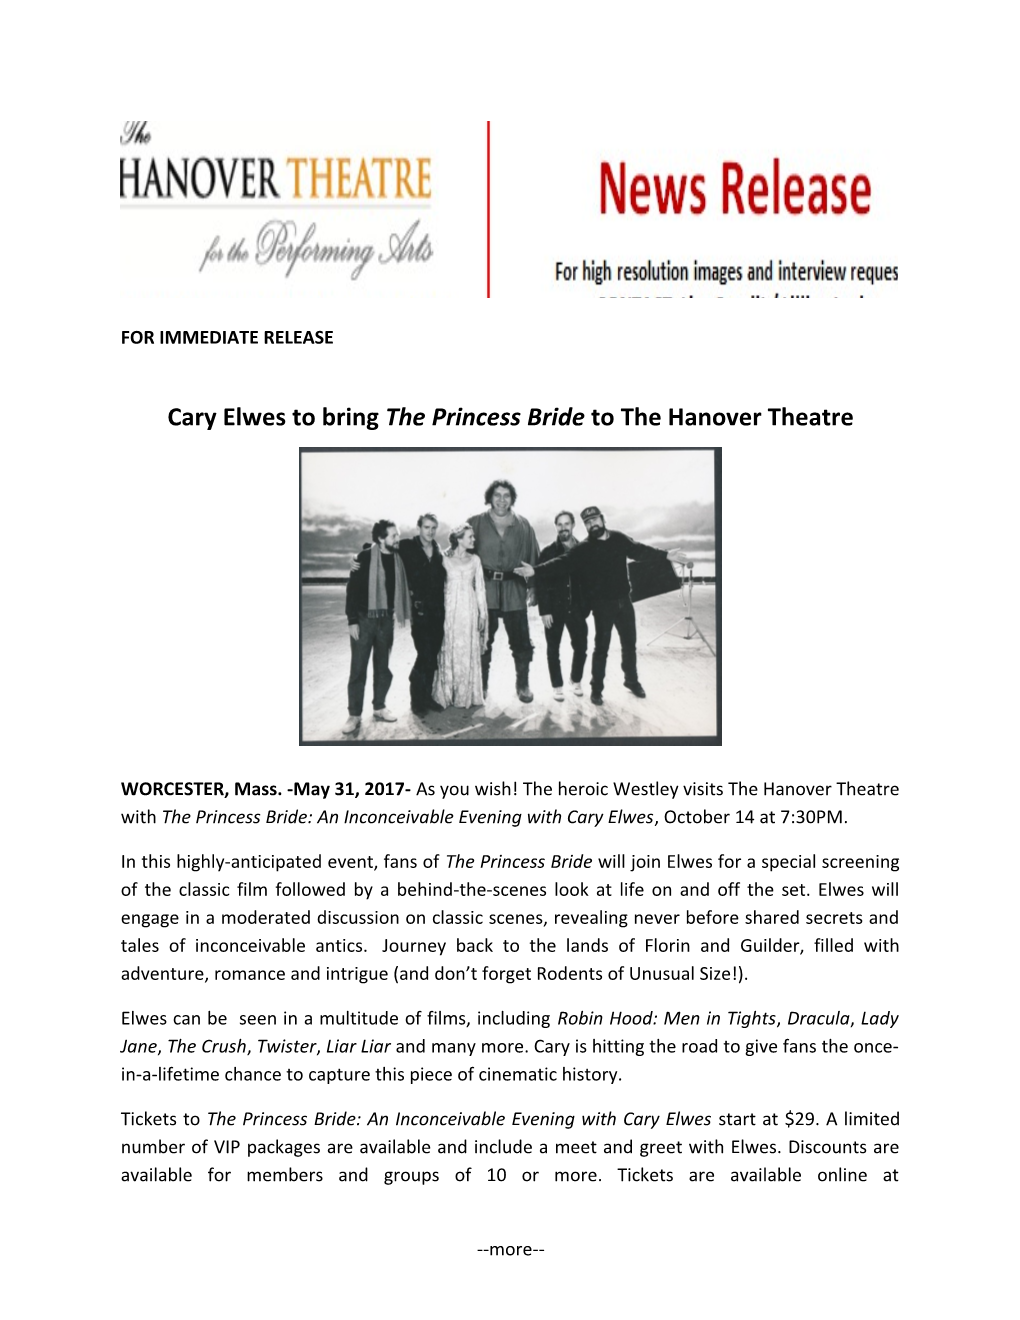 Cary Elwes to Bring the Princess Bride to the Hanover Theatre